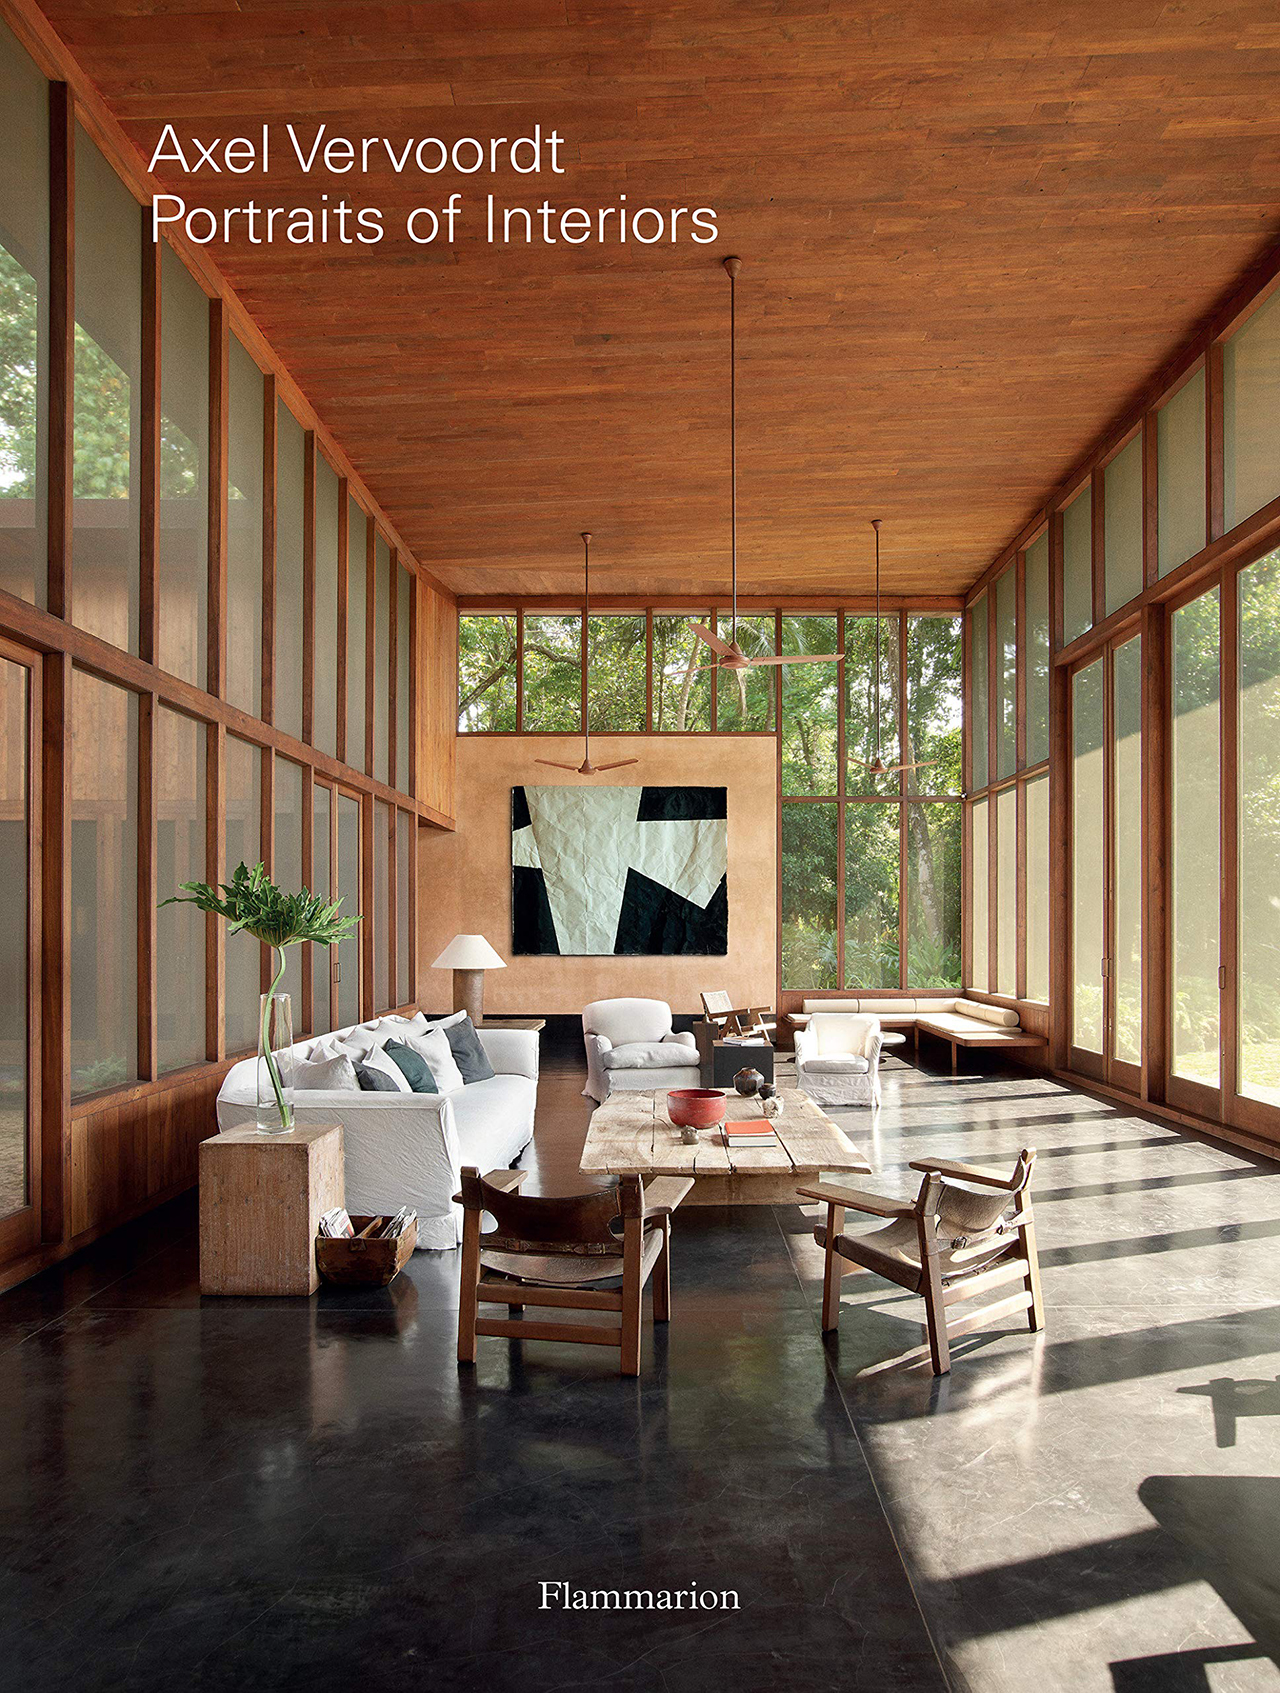 Axel Vervoordt / Portraits of Interiors. Photographed by Laziz Hamani. Published by Flammarion.